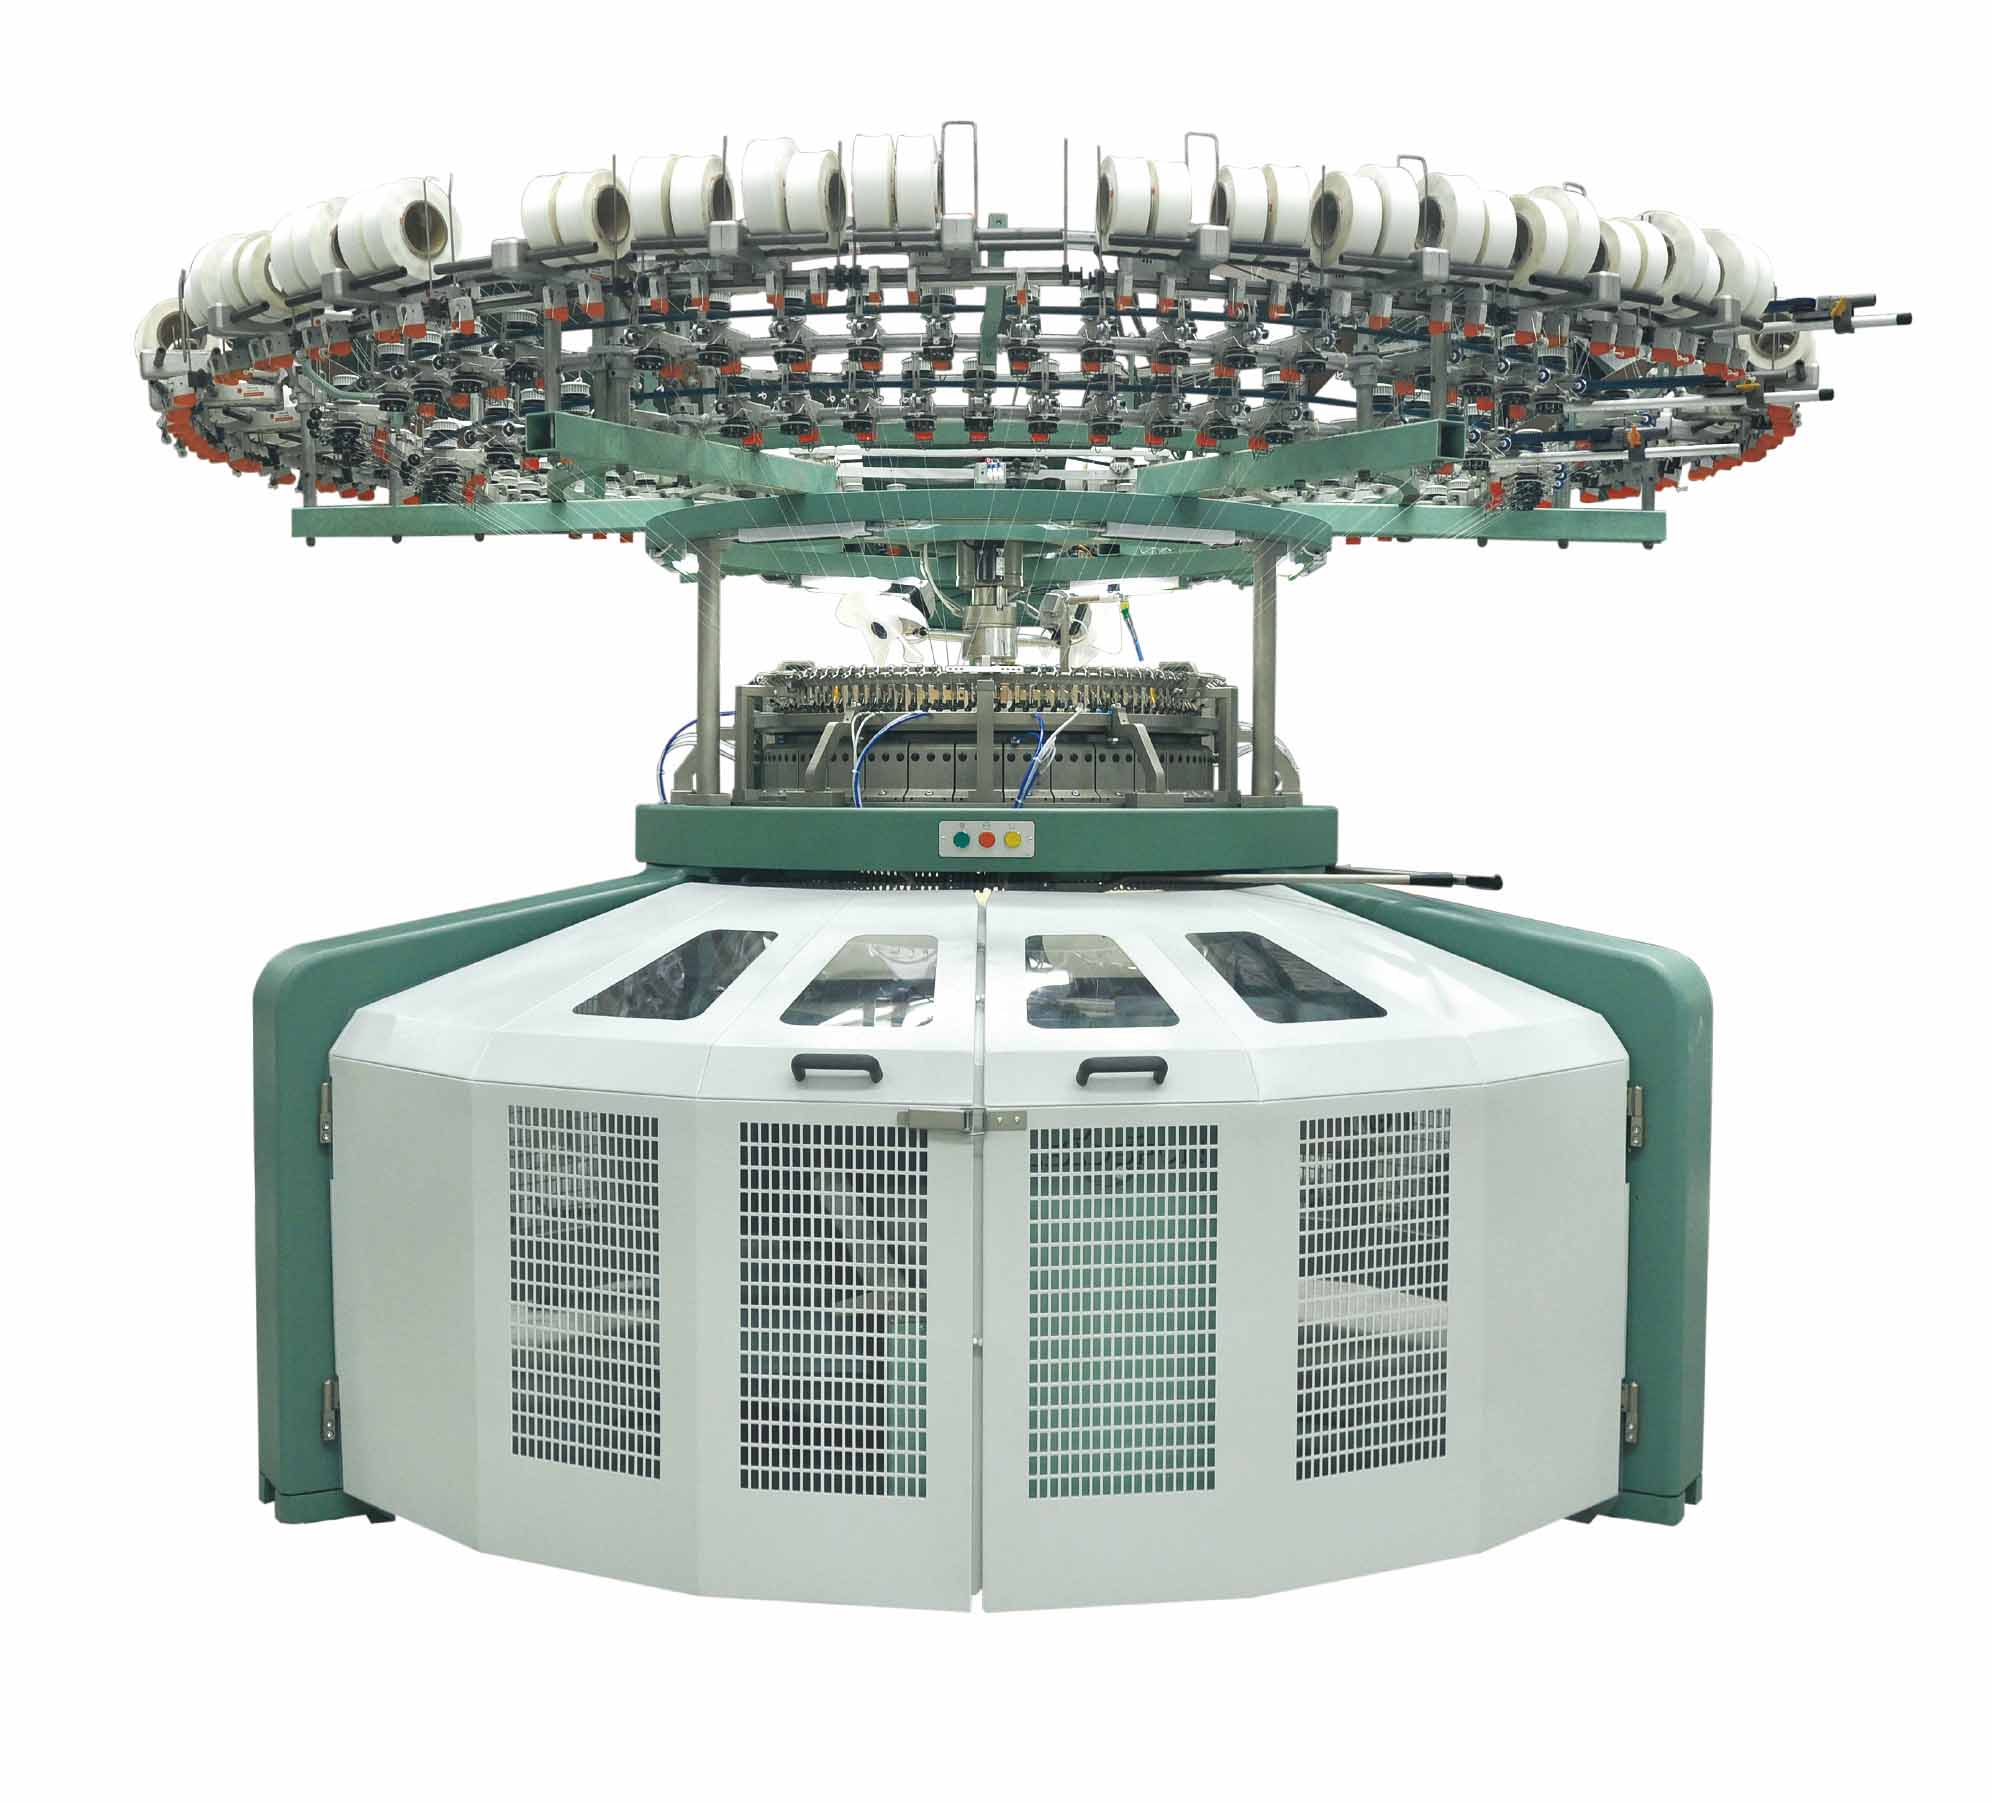 China's Best Circular Knitting Machine Manufacturer, Supplier, and Factory – Wholesale Deals Available